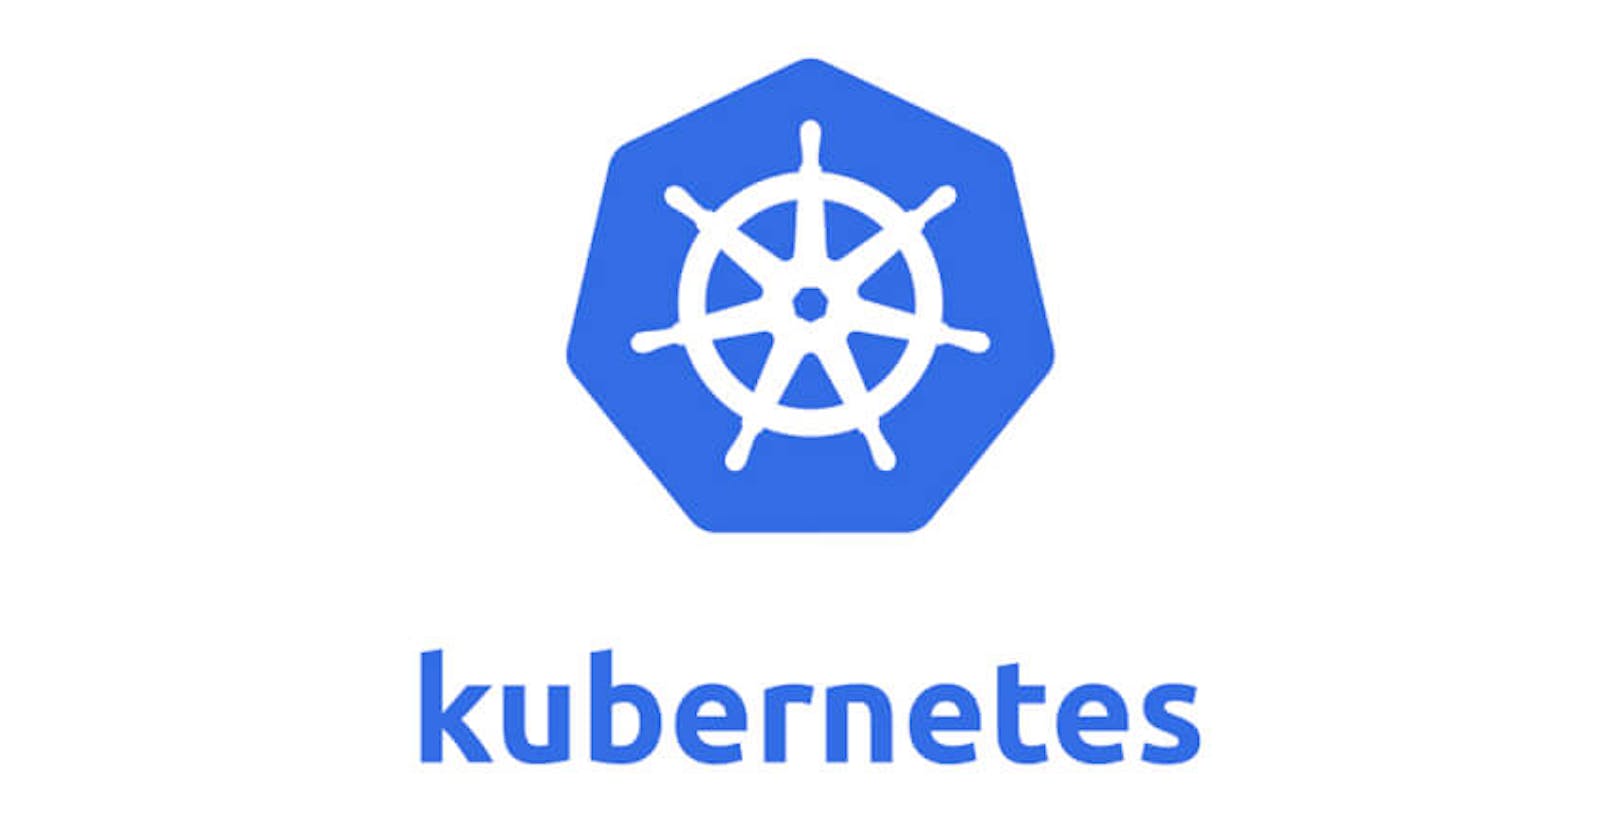 Why need containers and Kubernetes - I